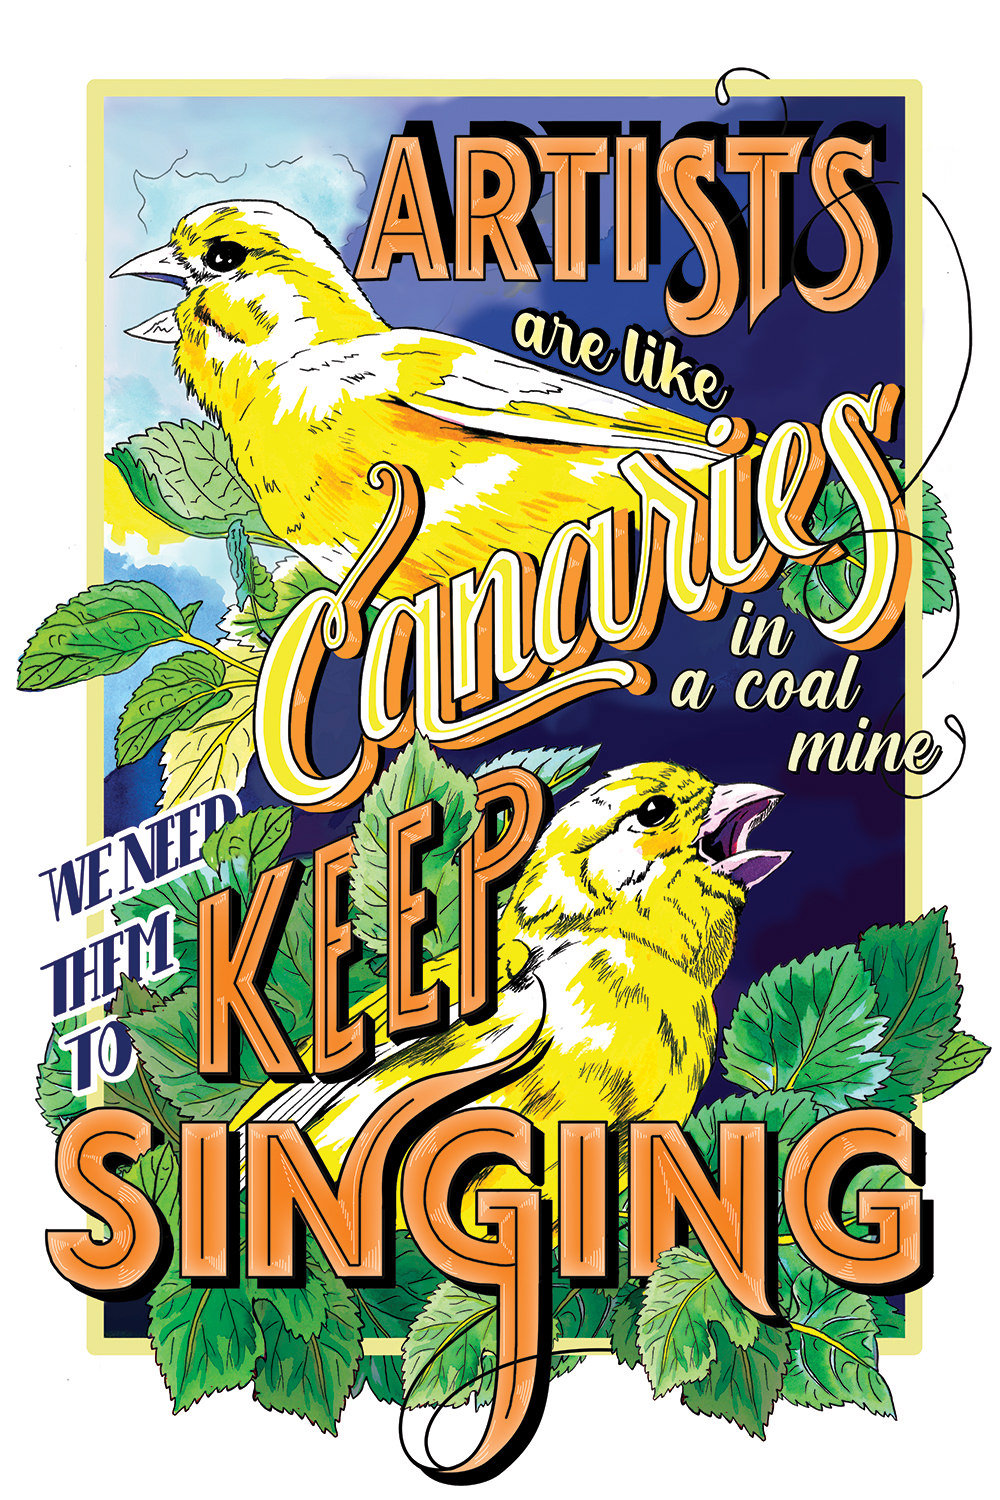 Keep Singing Illustrated Poster Support Artists